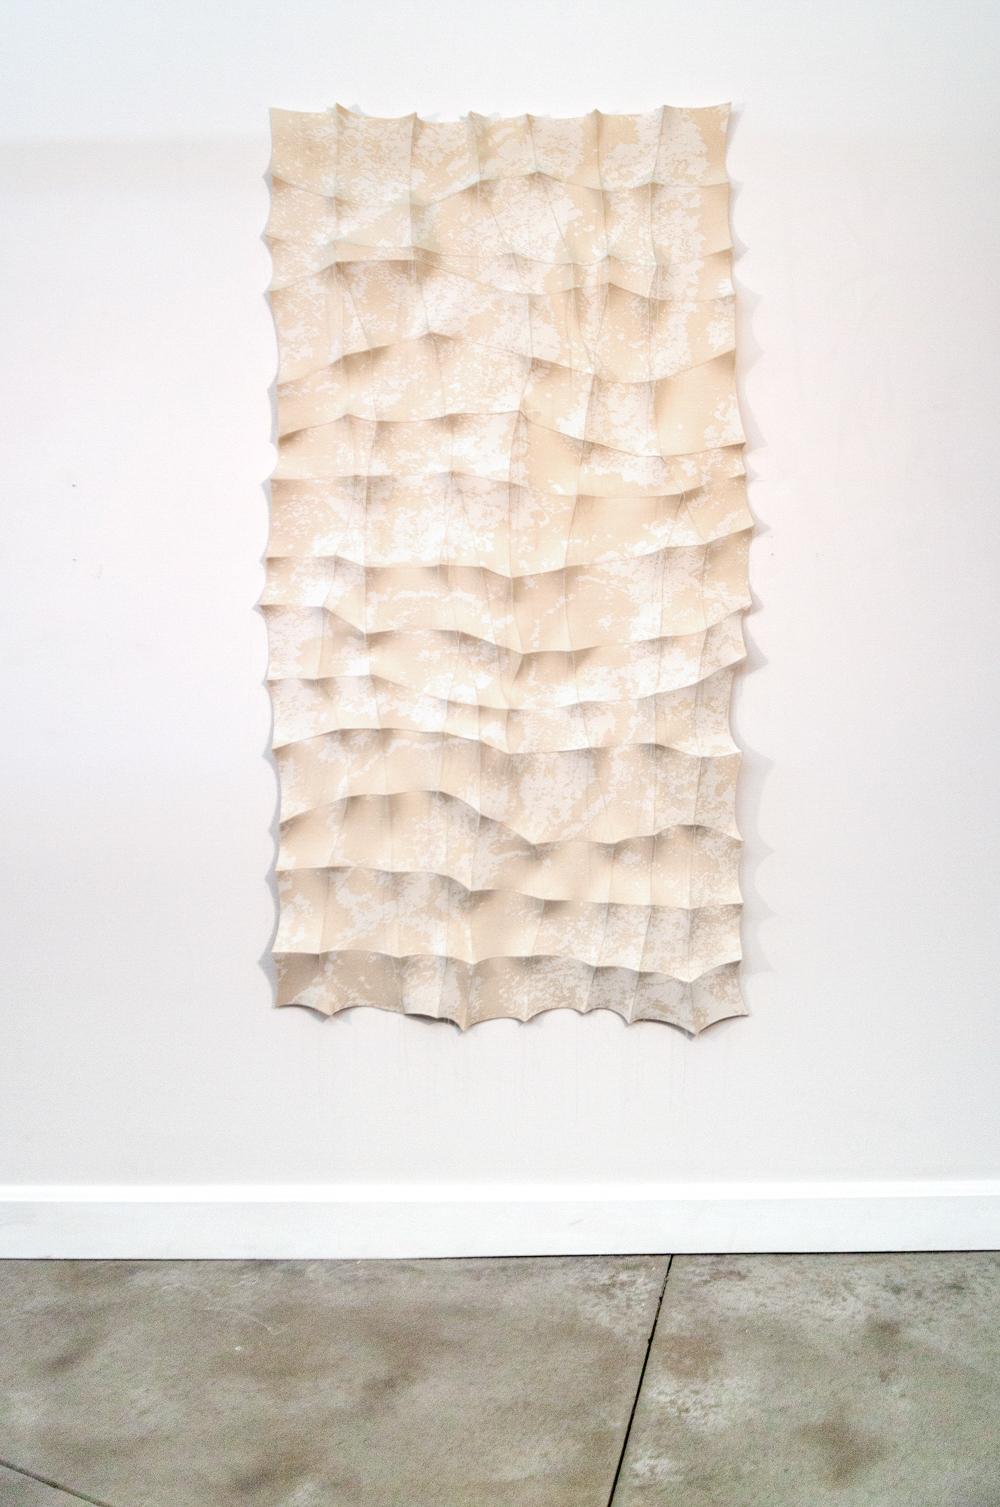 Inspired by the ancient markings of imposing natural rock formations seen at an American National Park, Chung-Im Kim has created a new series of striking fabric wall tapestries. Kim painstakingly sews together small pieces of fabric that are pulled